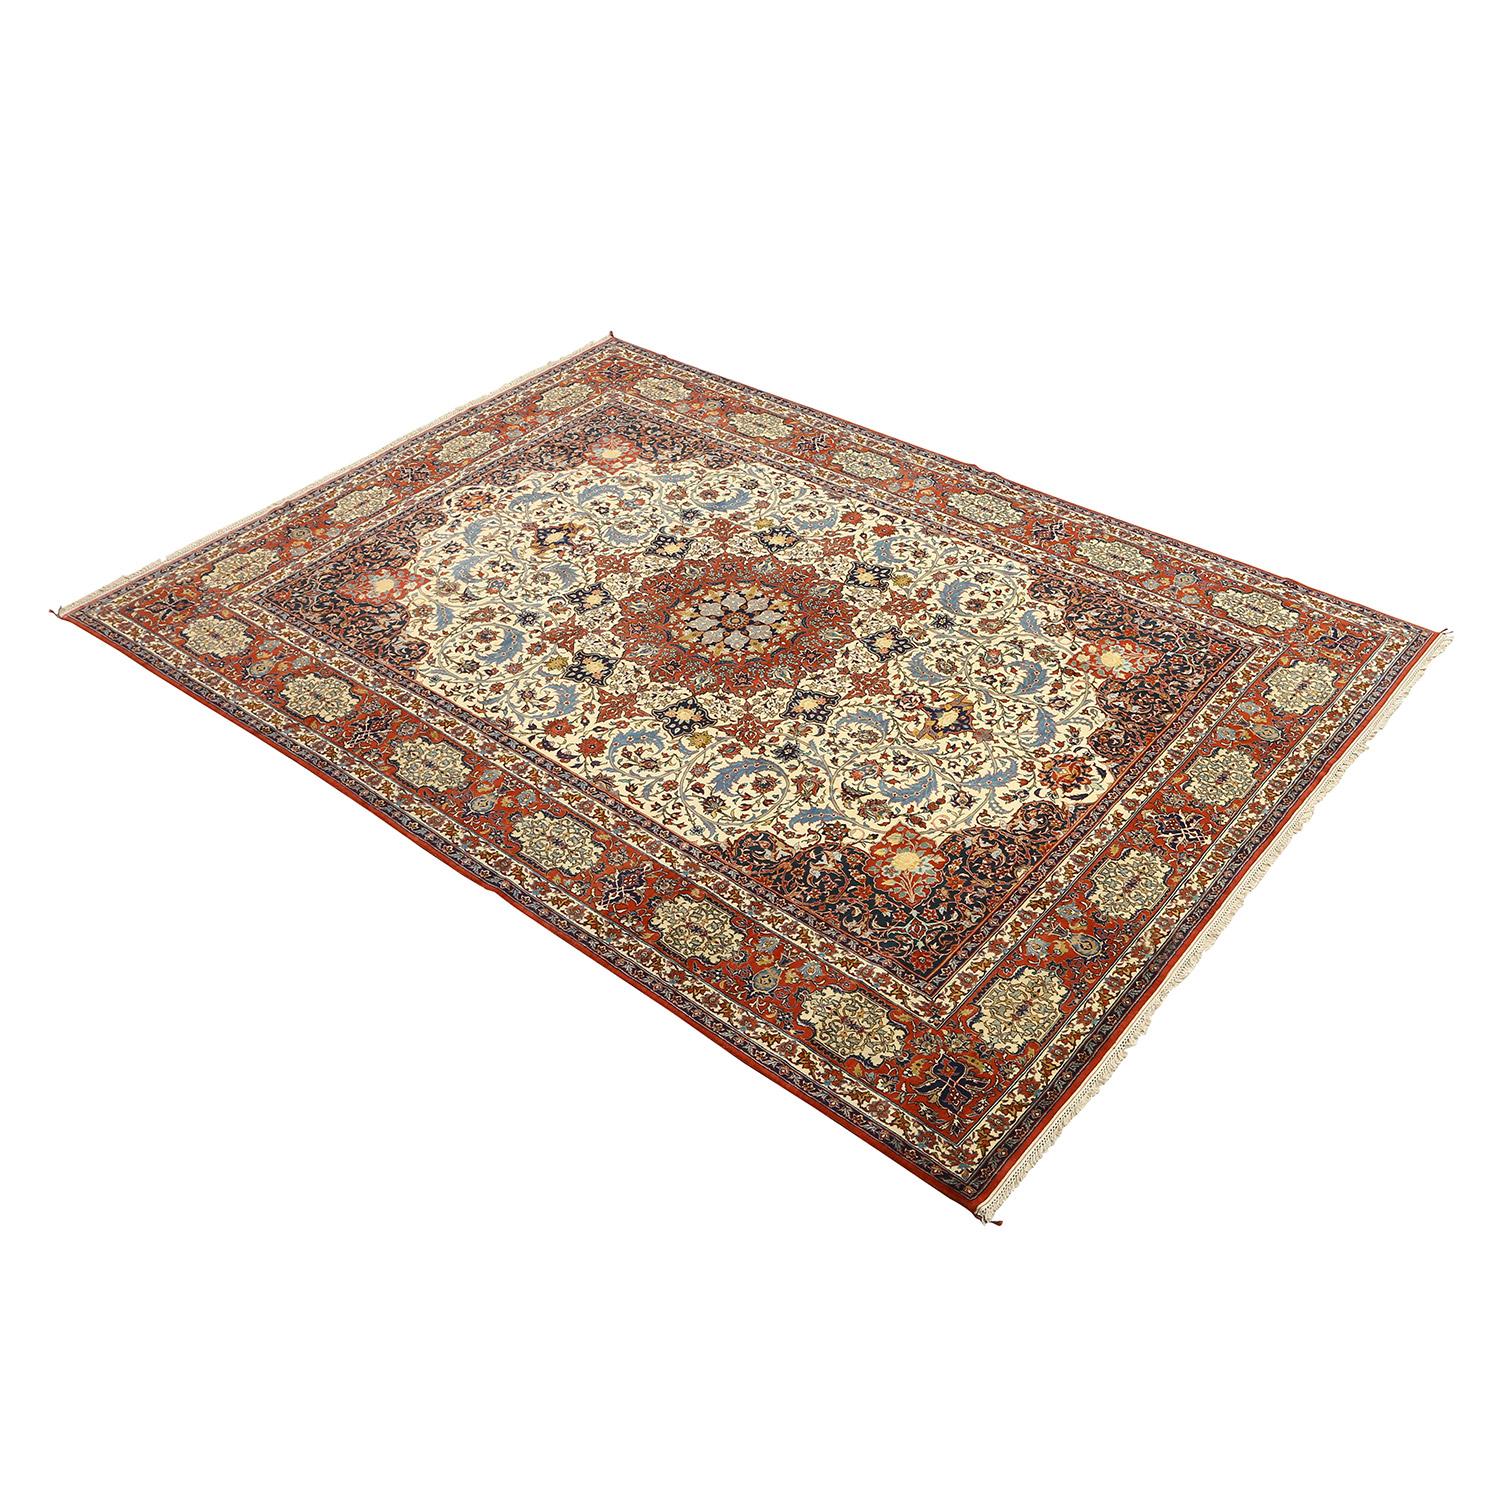 This Antique Isfahan Shourashi Rug, generously sized at 12 feet by 10 feet, is a testament to the enduring elegance of Persian craftsmanship. Its captivating Center Medallion Design, adorned in serene shades of cream with striking pops of red, navy,